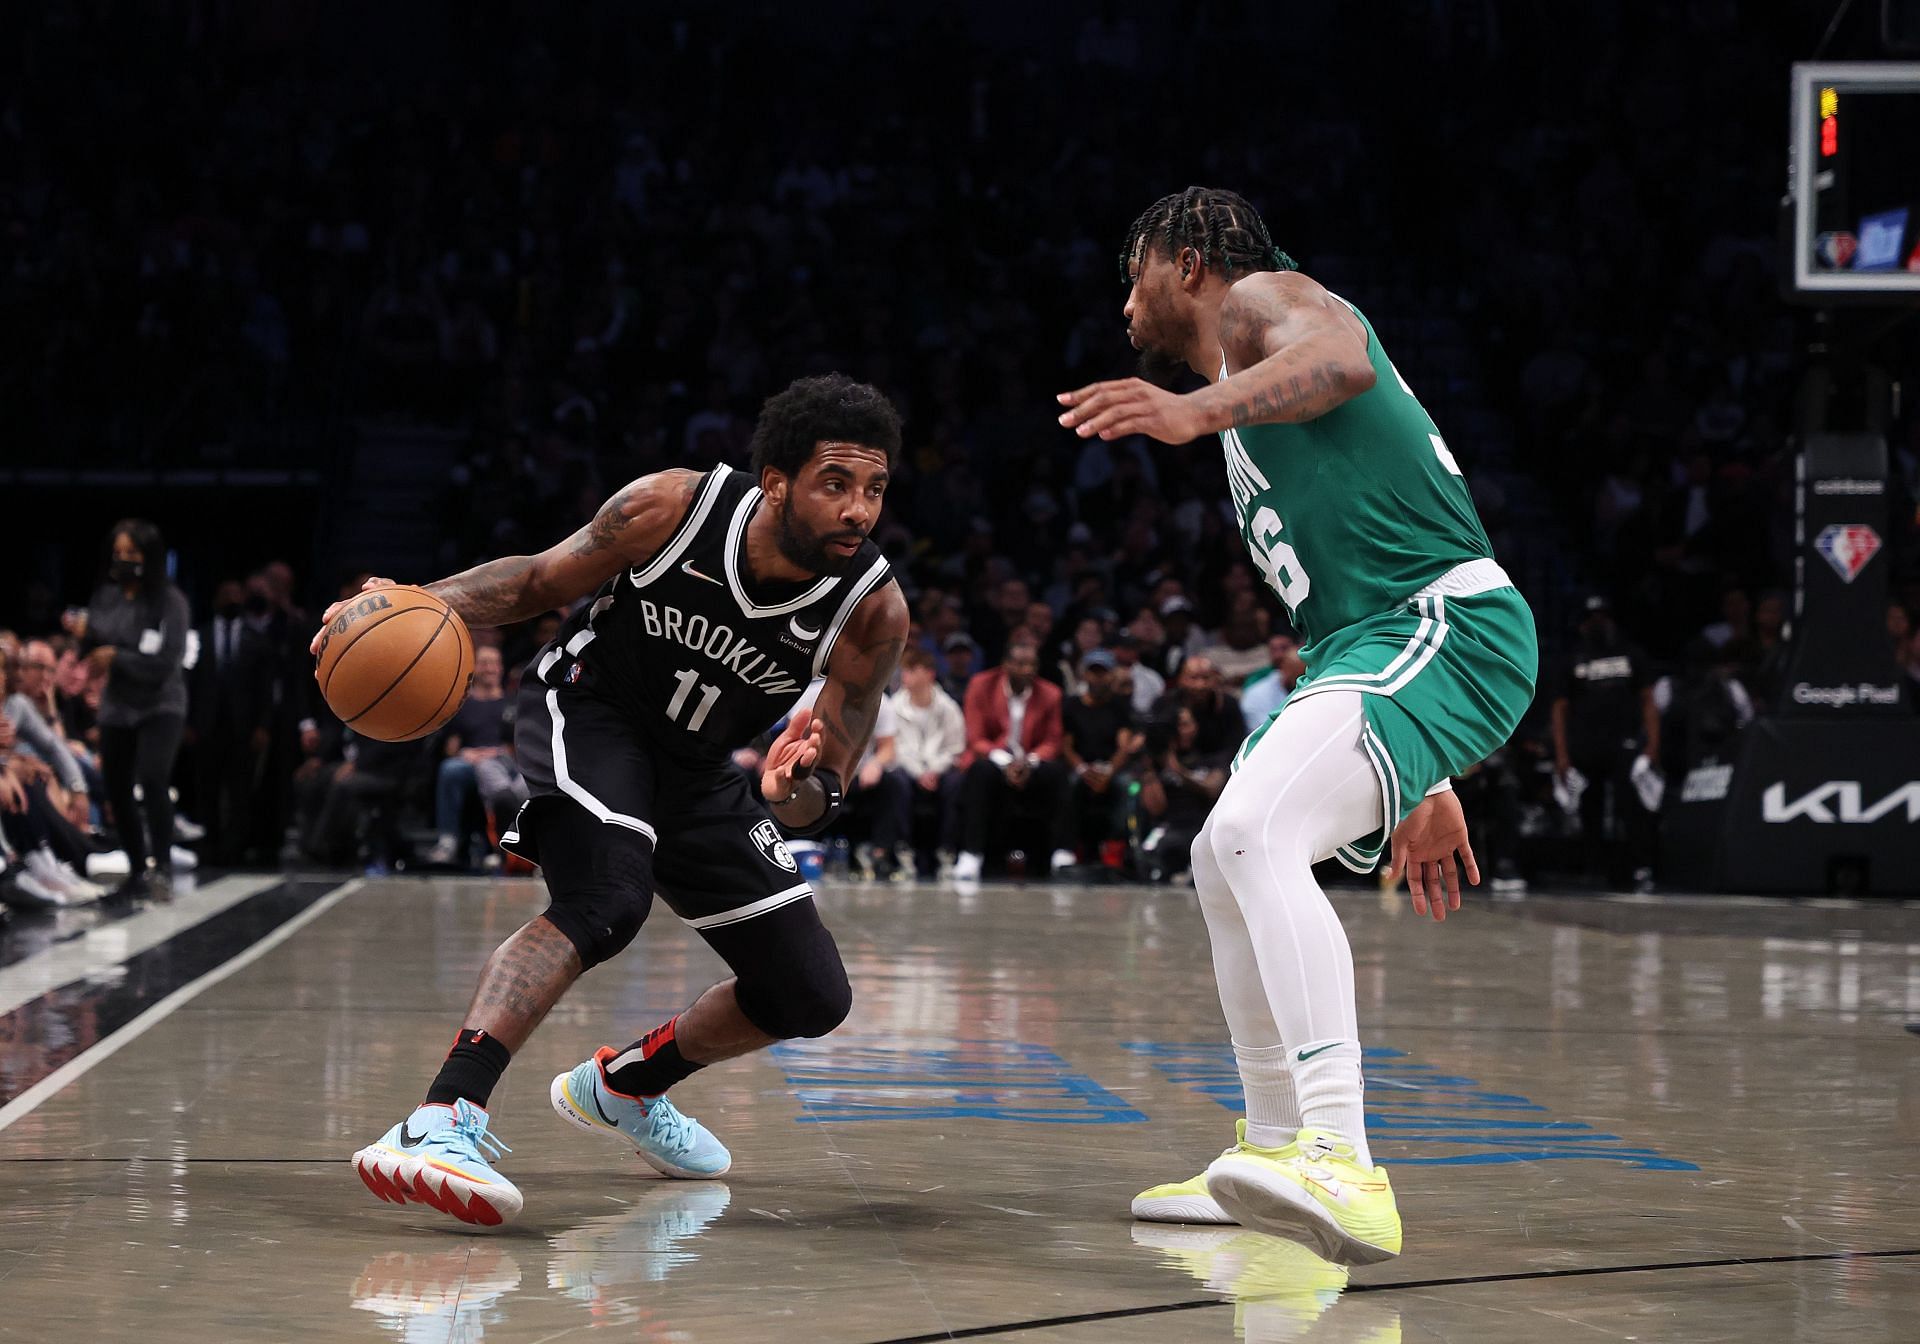 Kyrie Irving attempts to break away from Marcus Smart.